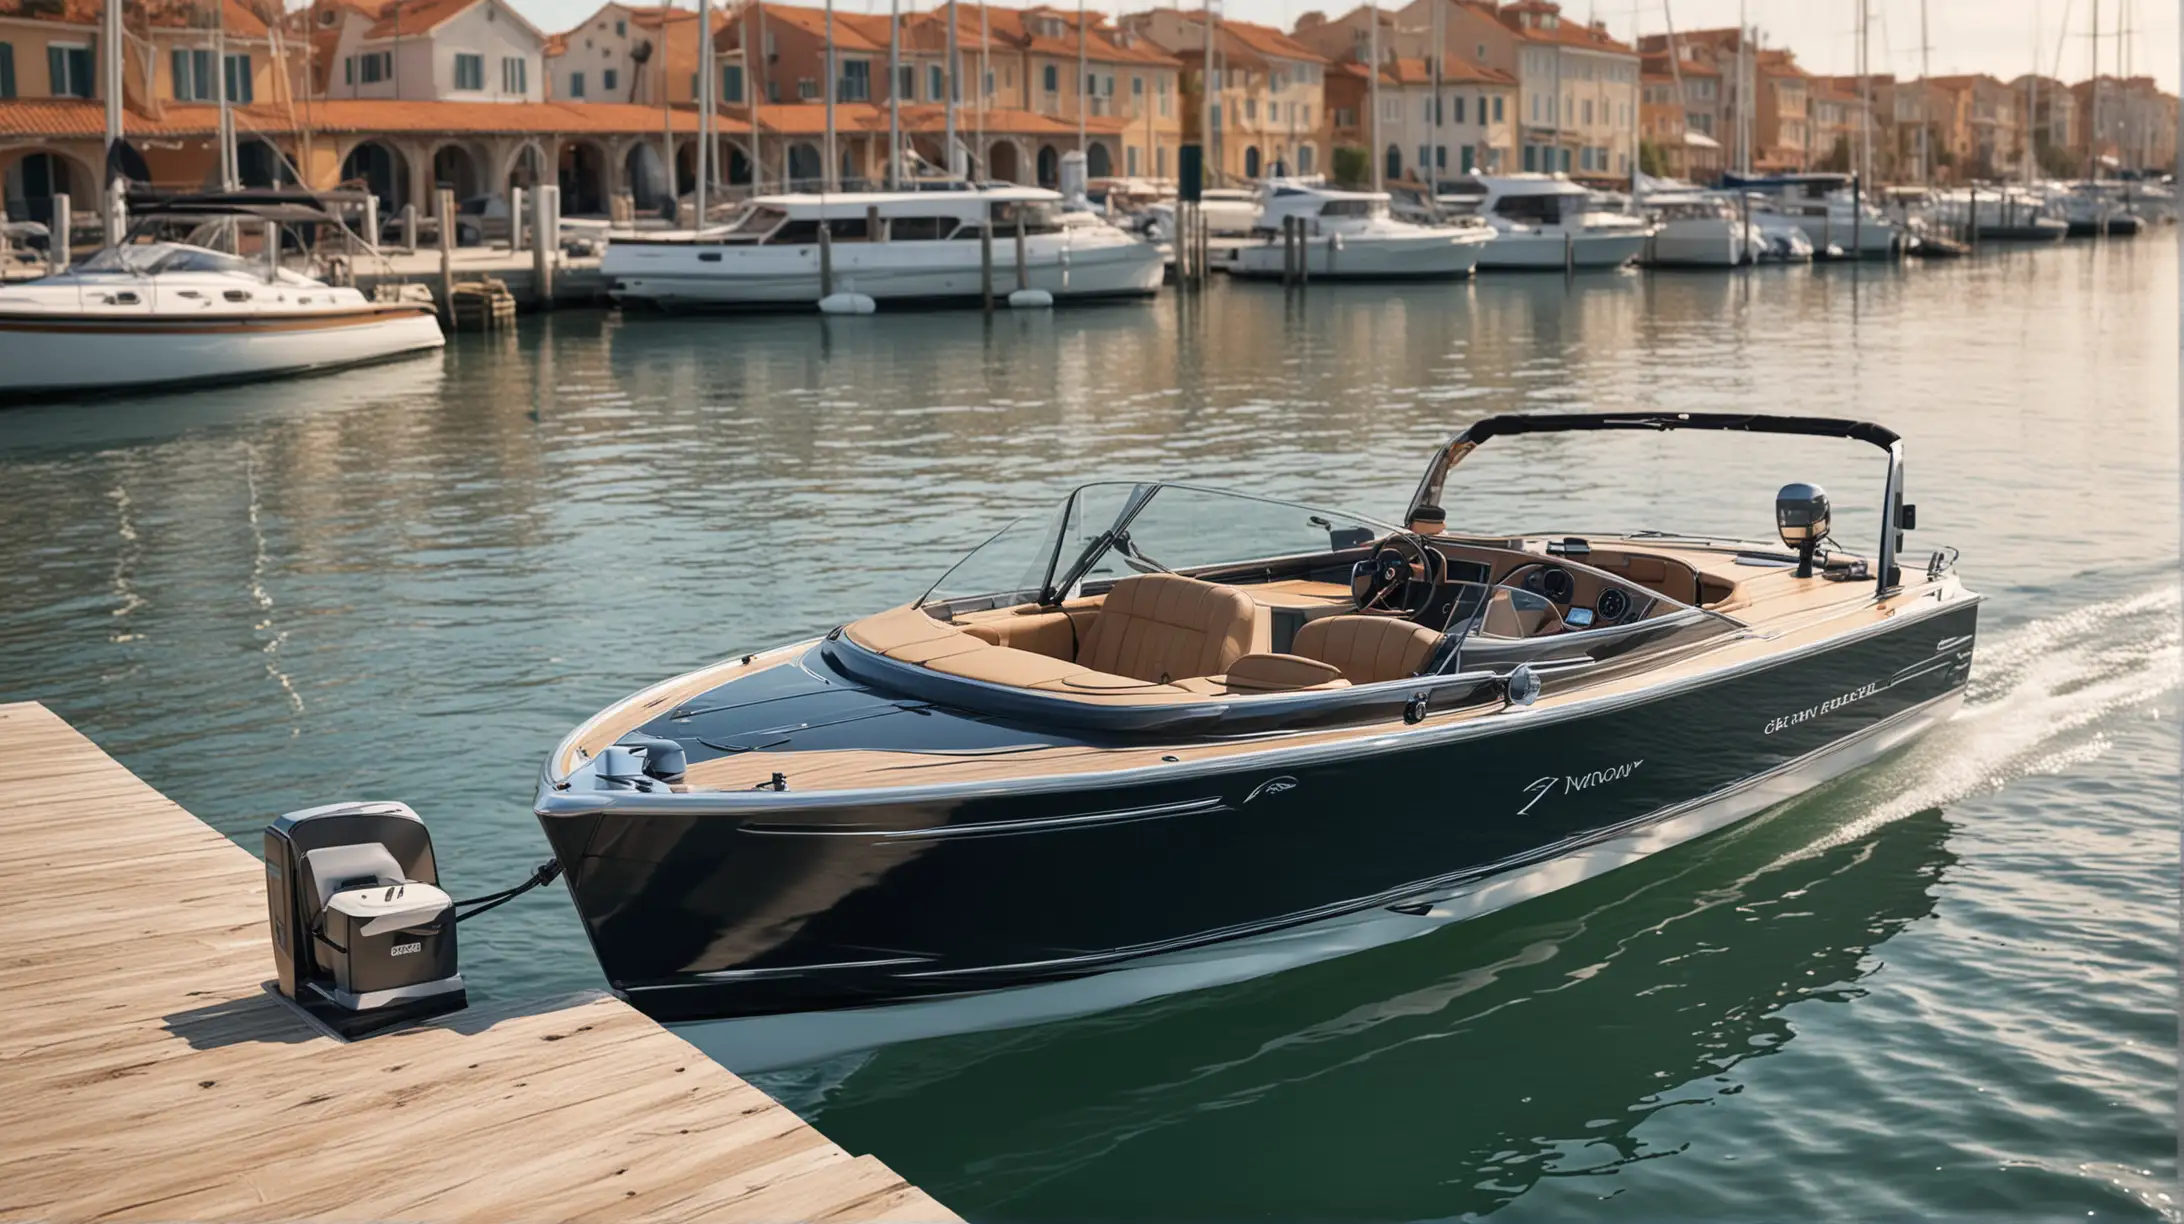 Create a realistic image of an electric (EV) Riva boat (gentlemen's runabout) being charged by an EV charger installed near the edge of a marina dock